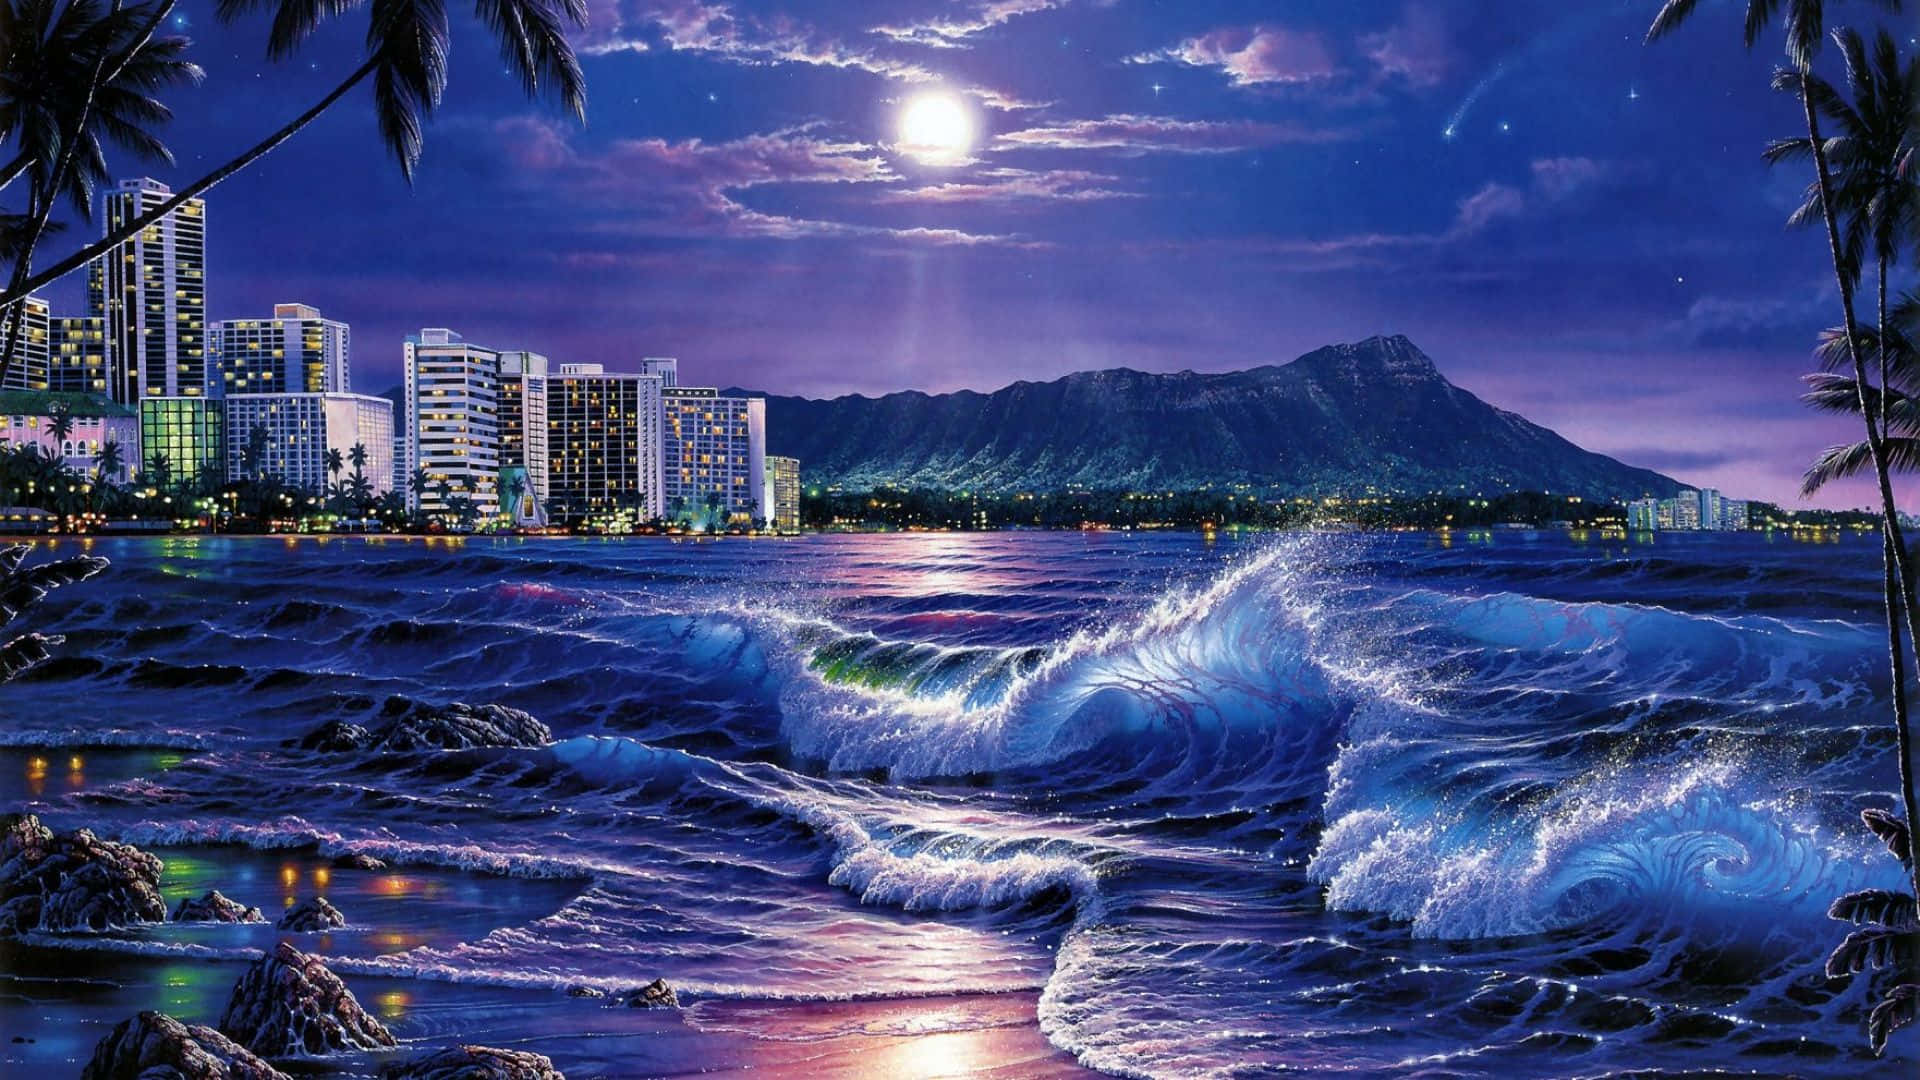 Vibrant Beach Art with Waves and Sunsets Wallpaper